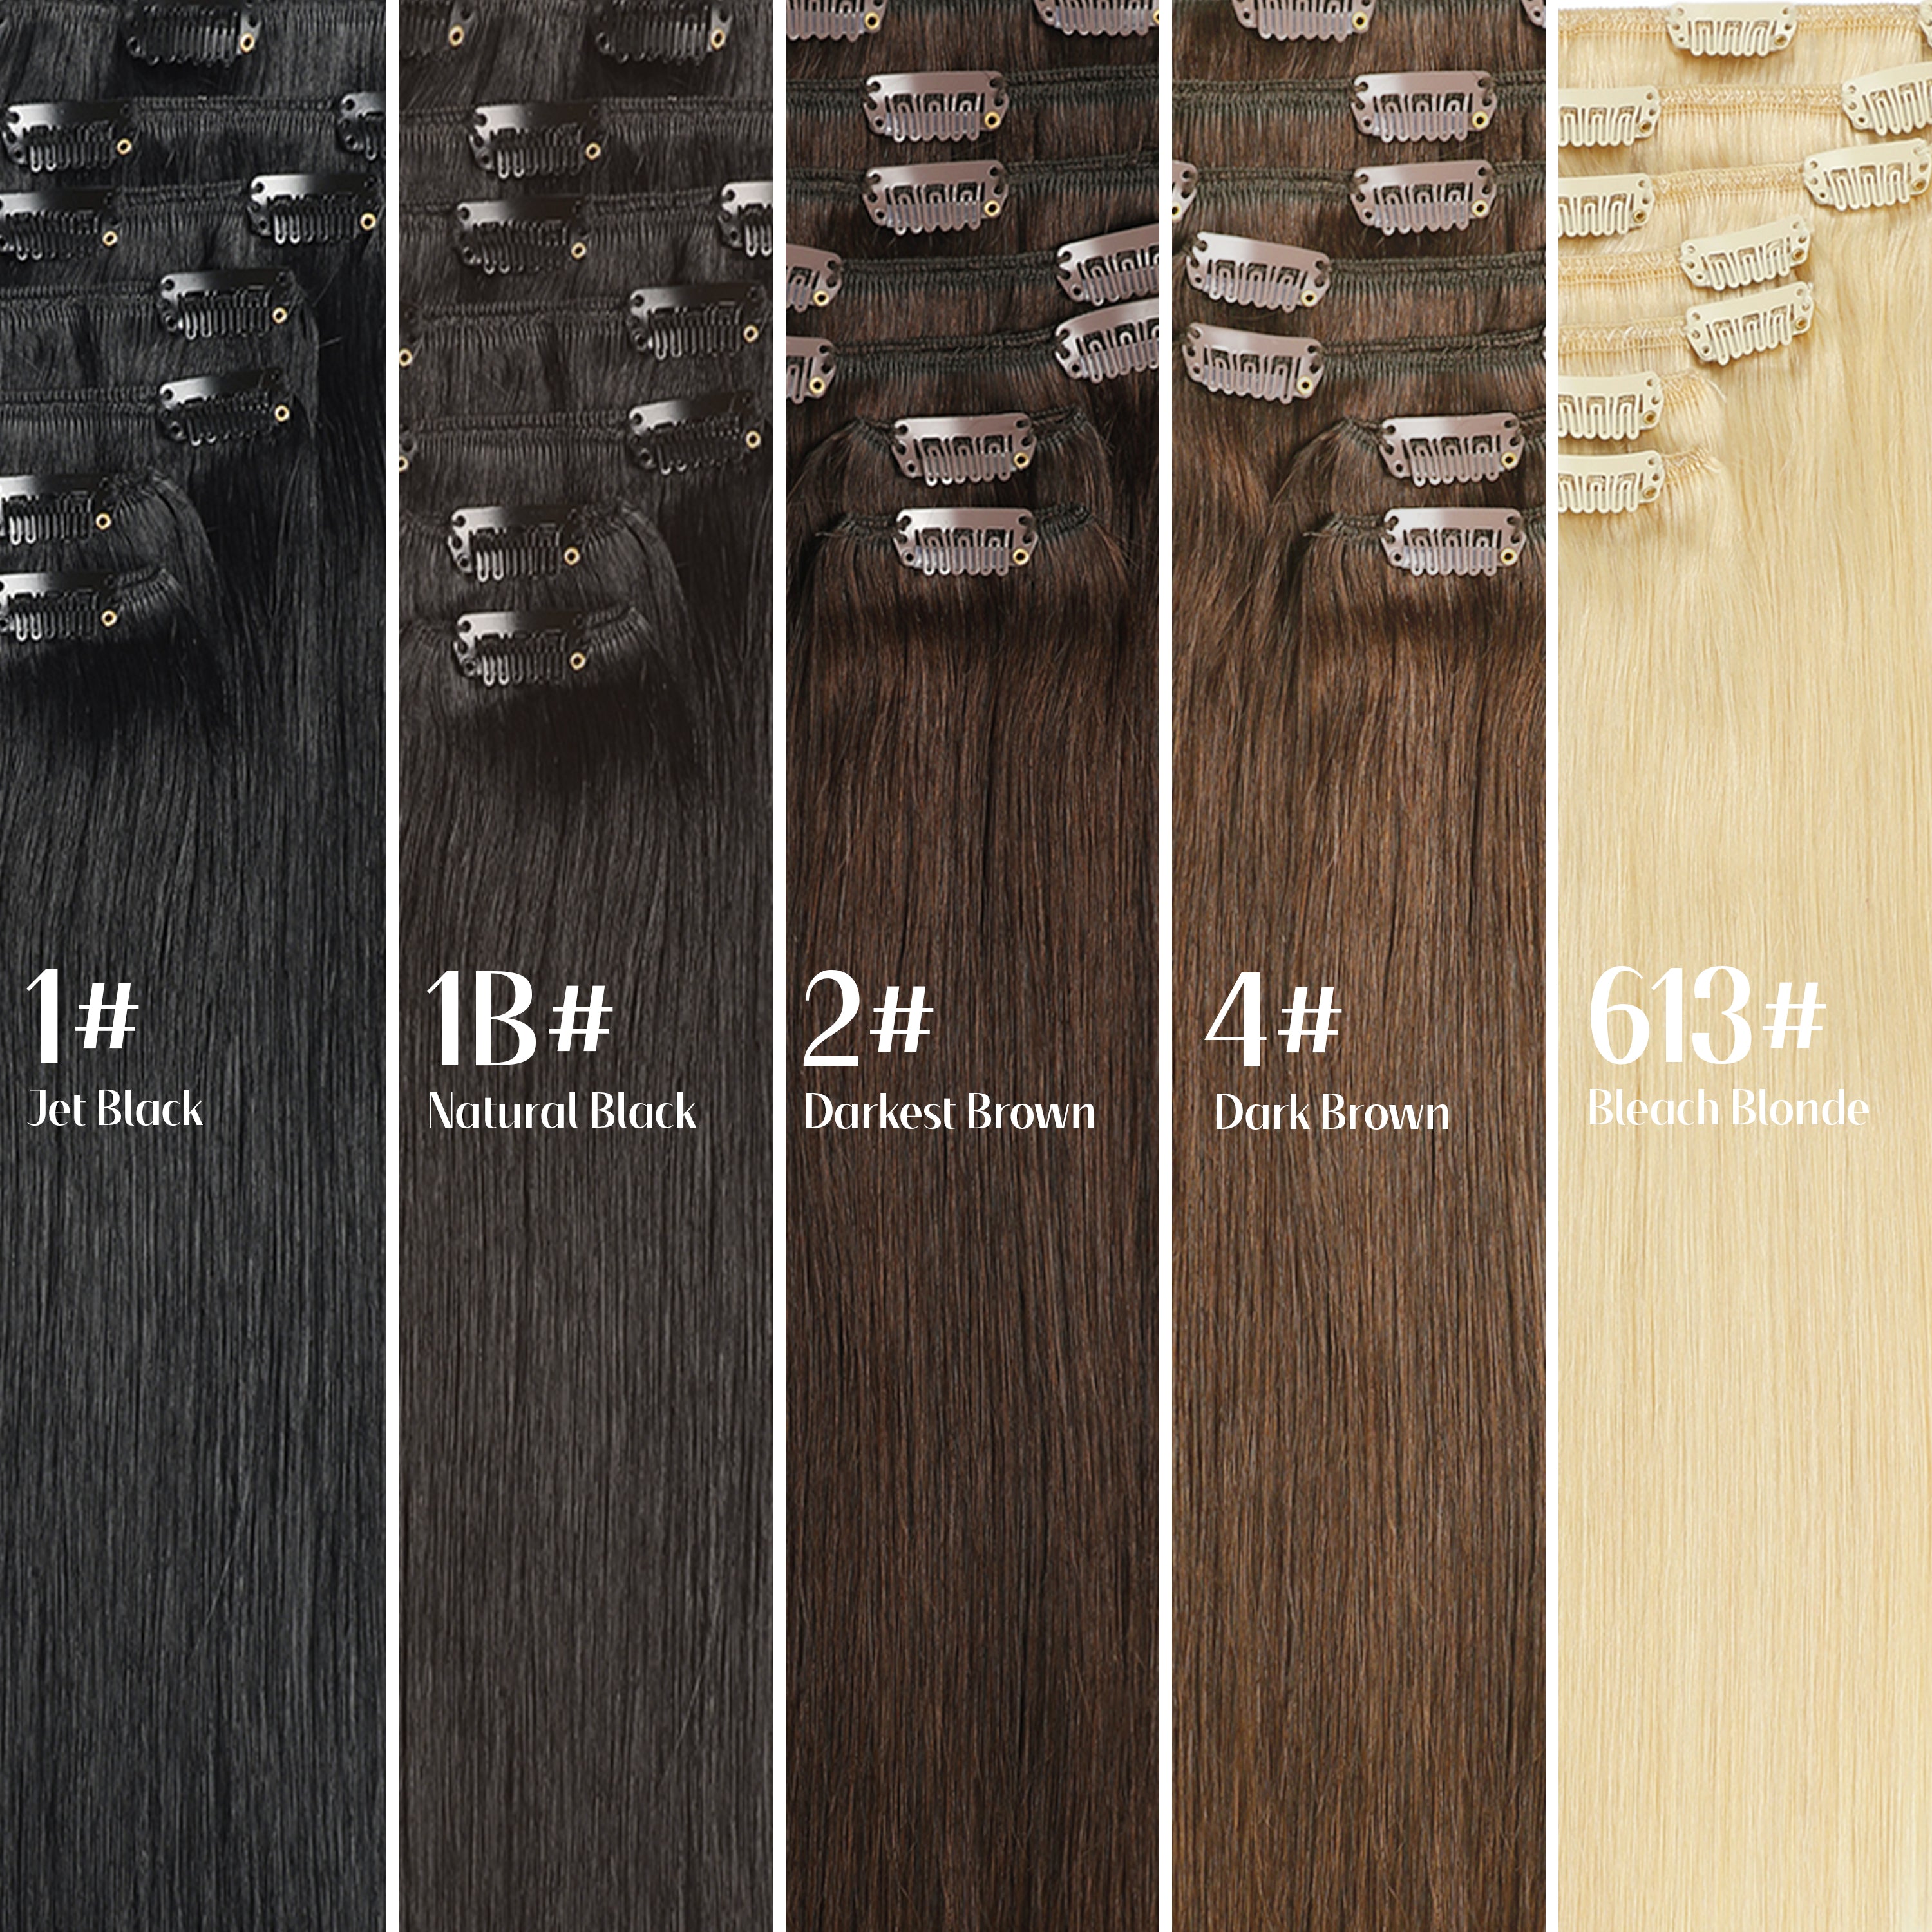 Straight 7 PCS Set Thick Clip in Hair Extensions (1# 1B# 2# 4# 613# Color) 100% Human Hair New York Store Pick Up